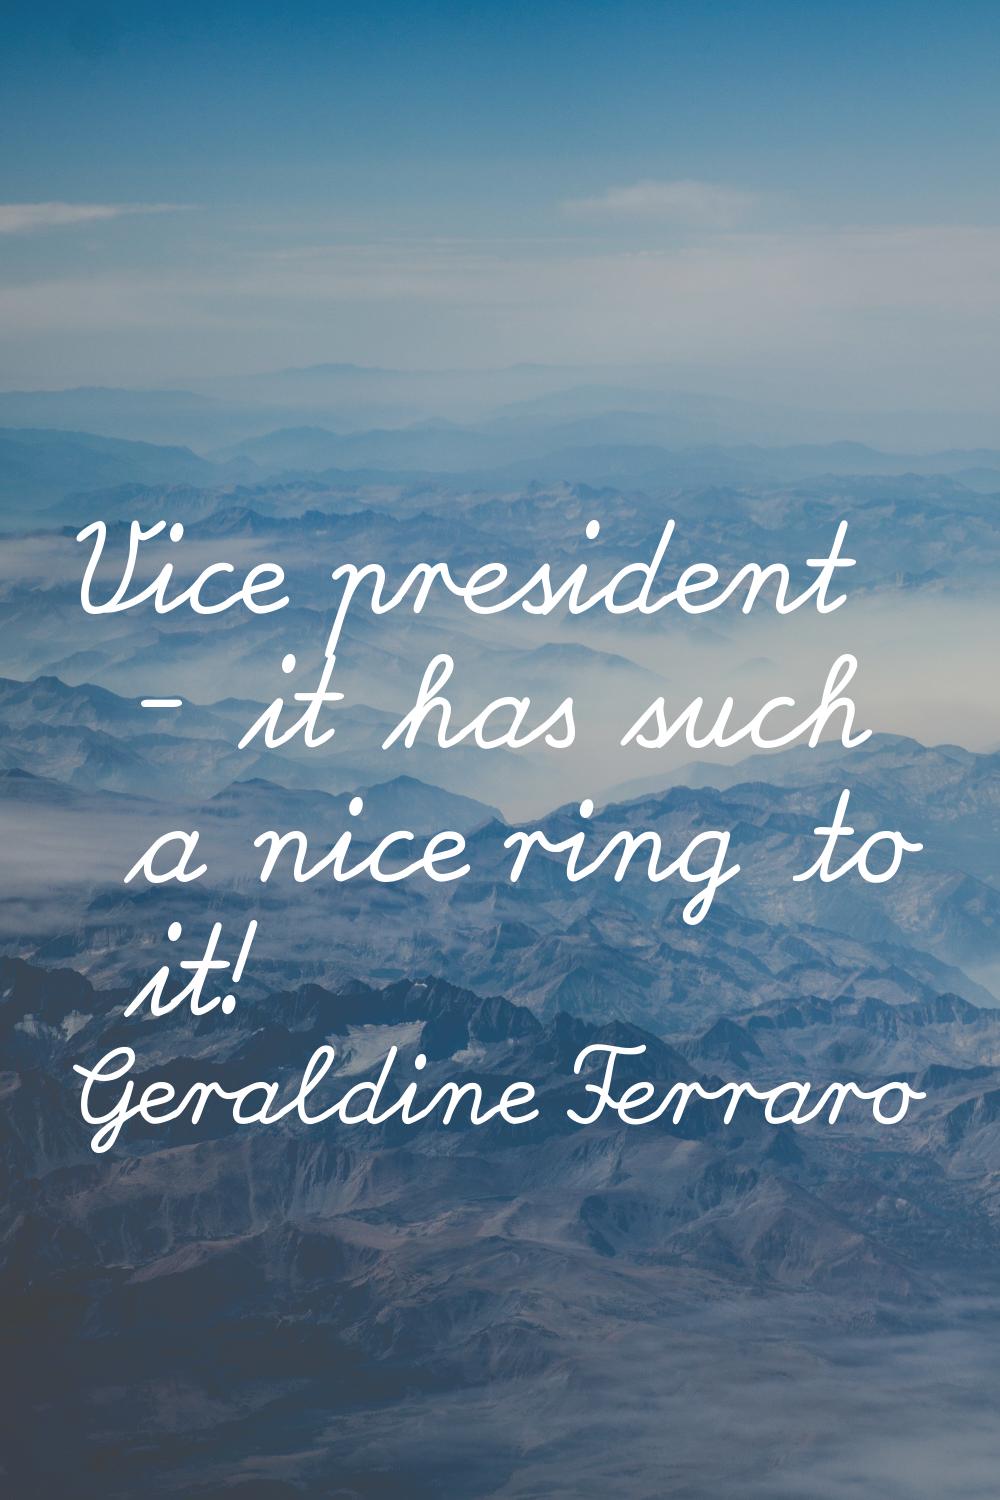 Vice president - it has such a nice ring to it!